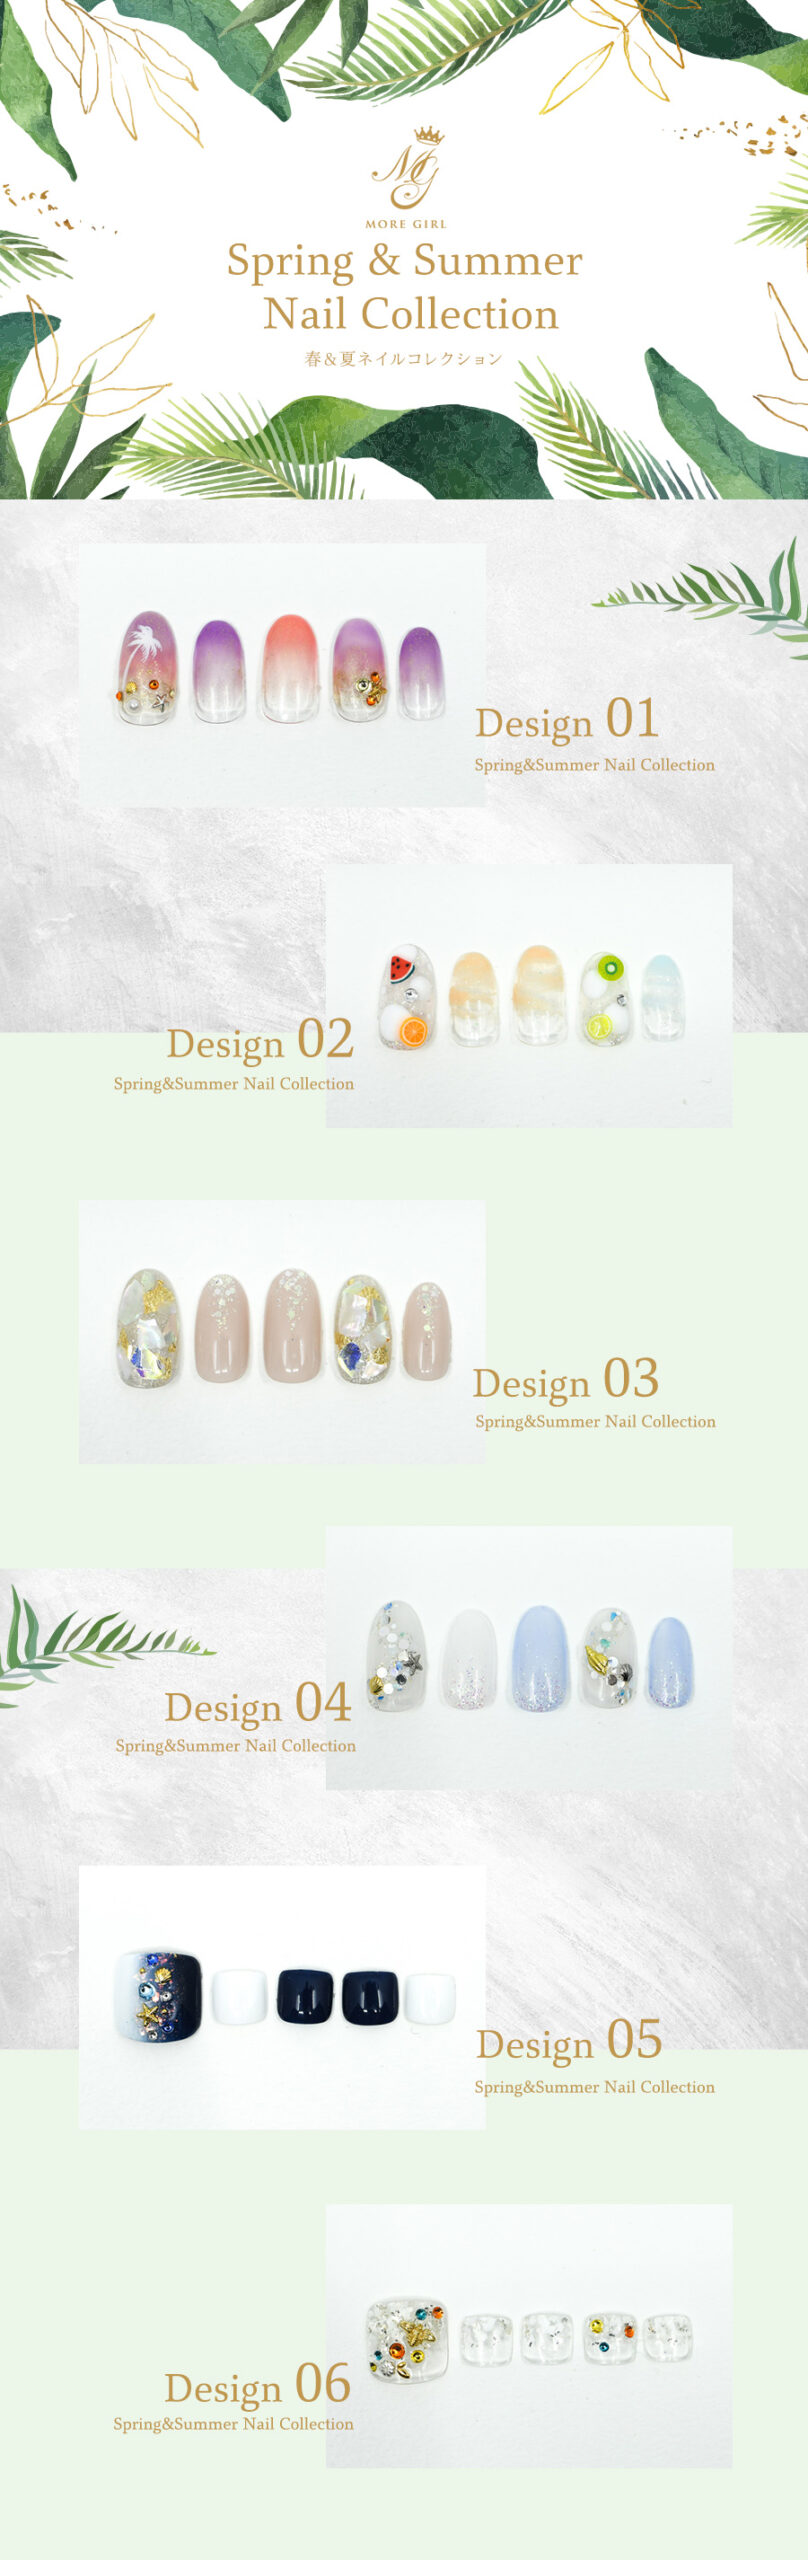 Spring&Summer Nail Collection